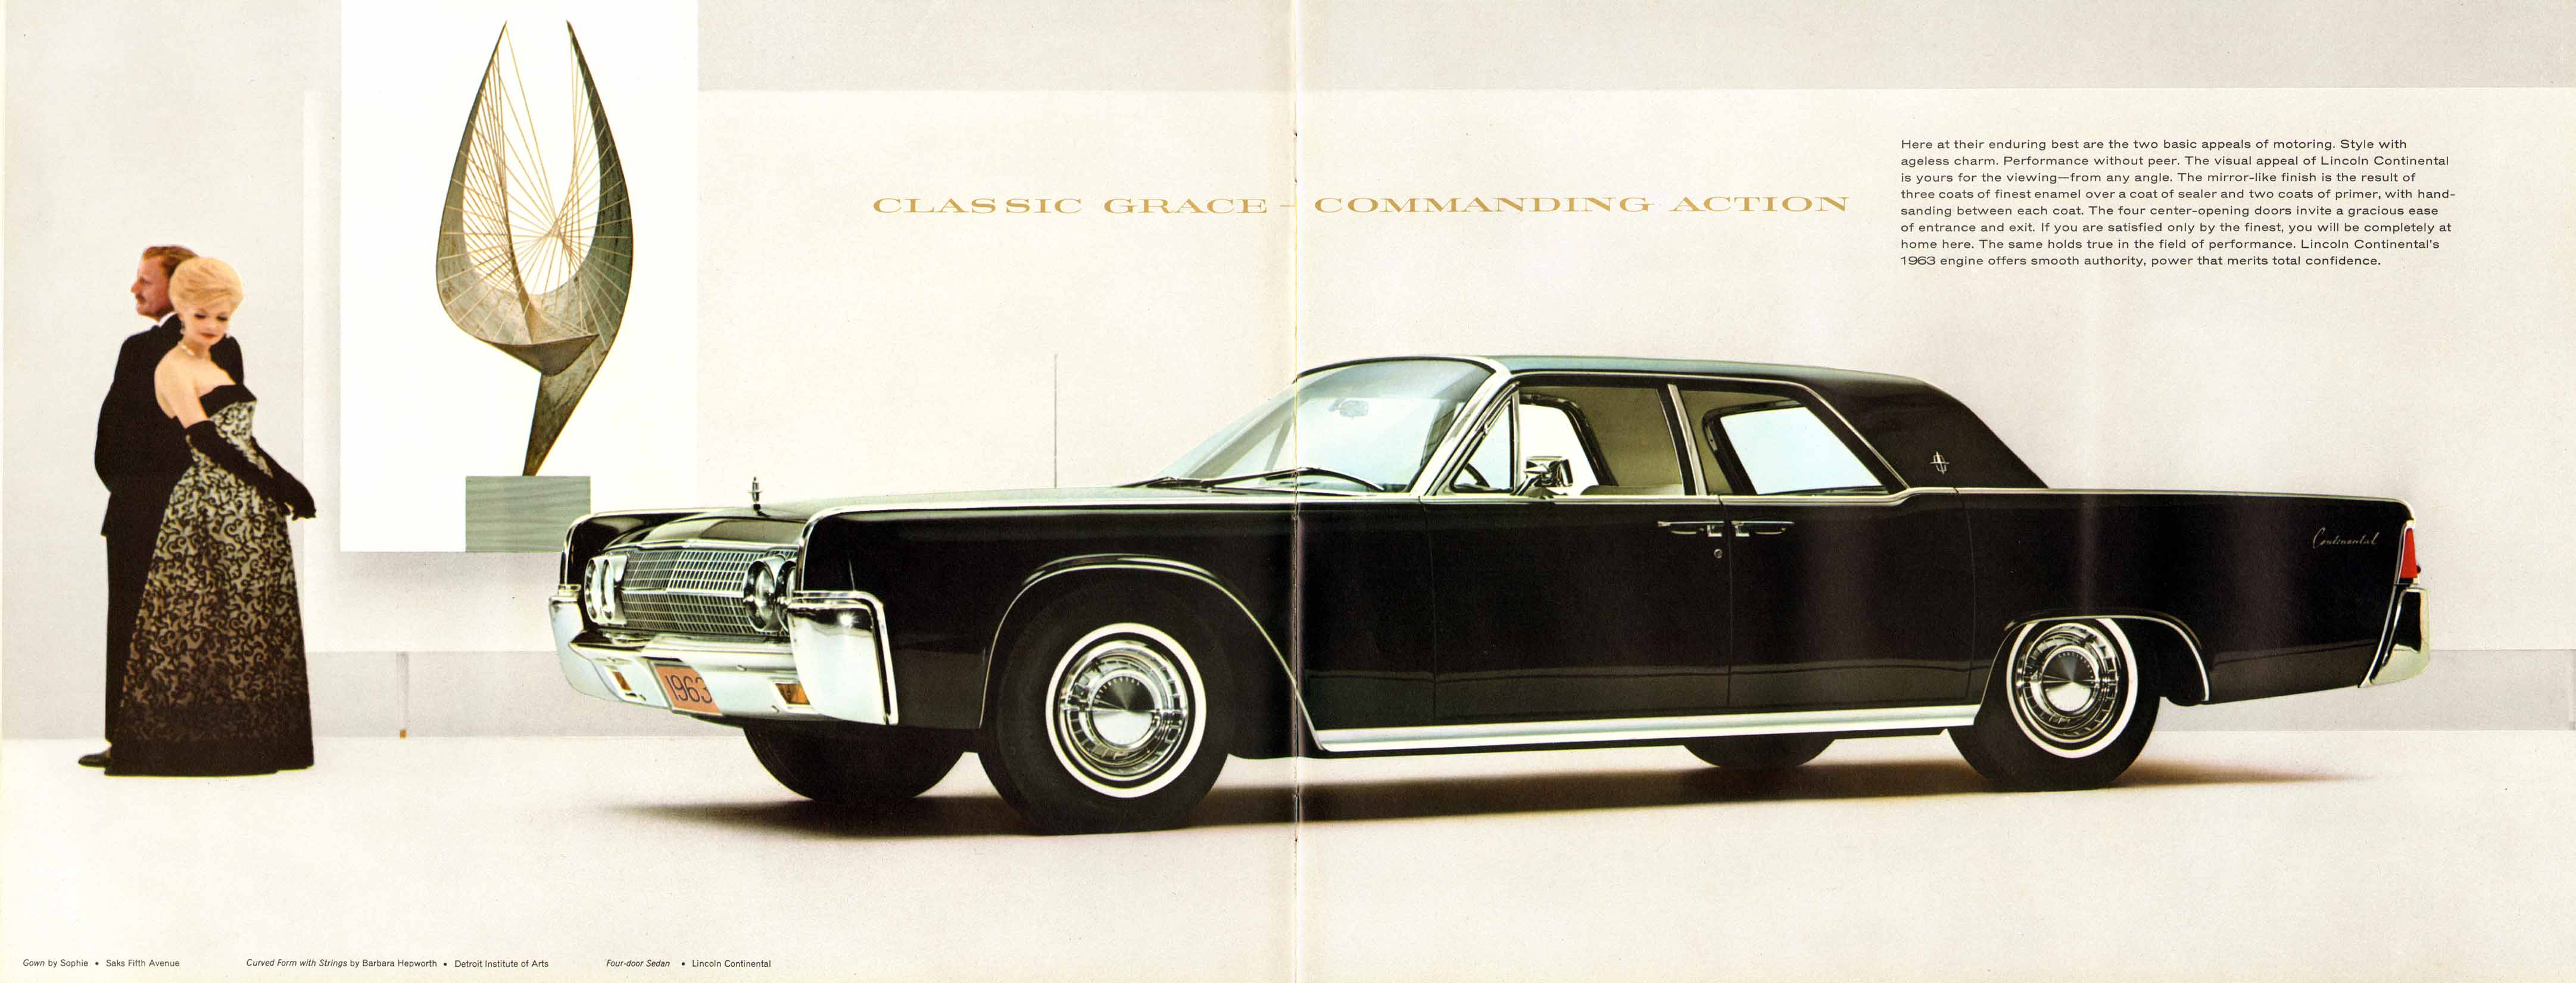 Ah, the good old days - the stylin' 1963 Lincoln Continental